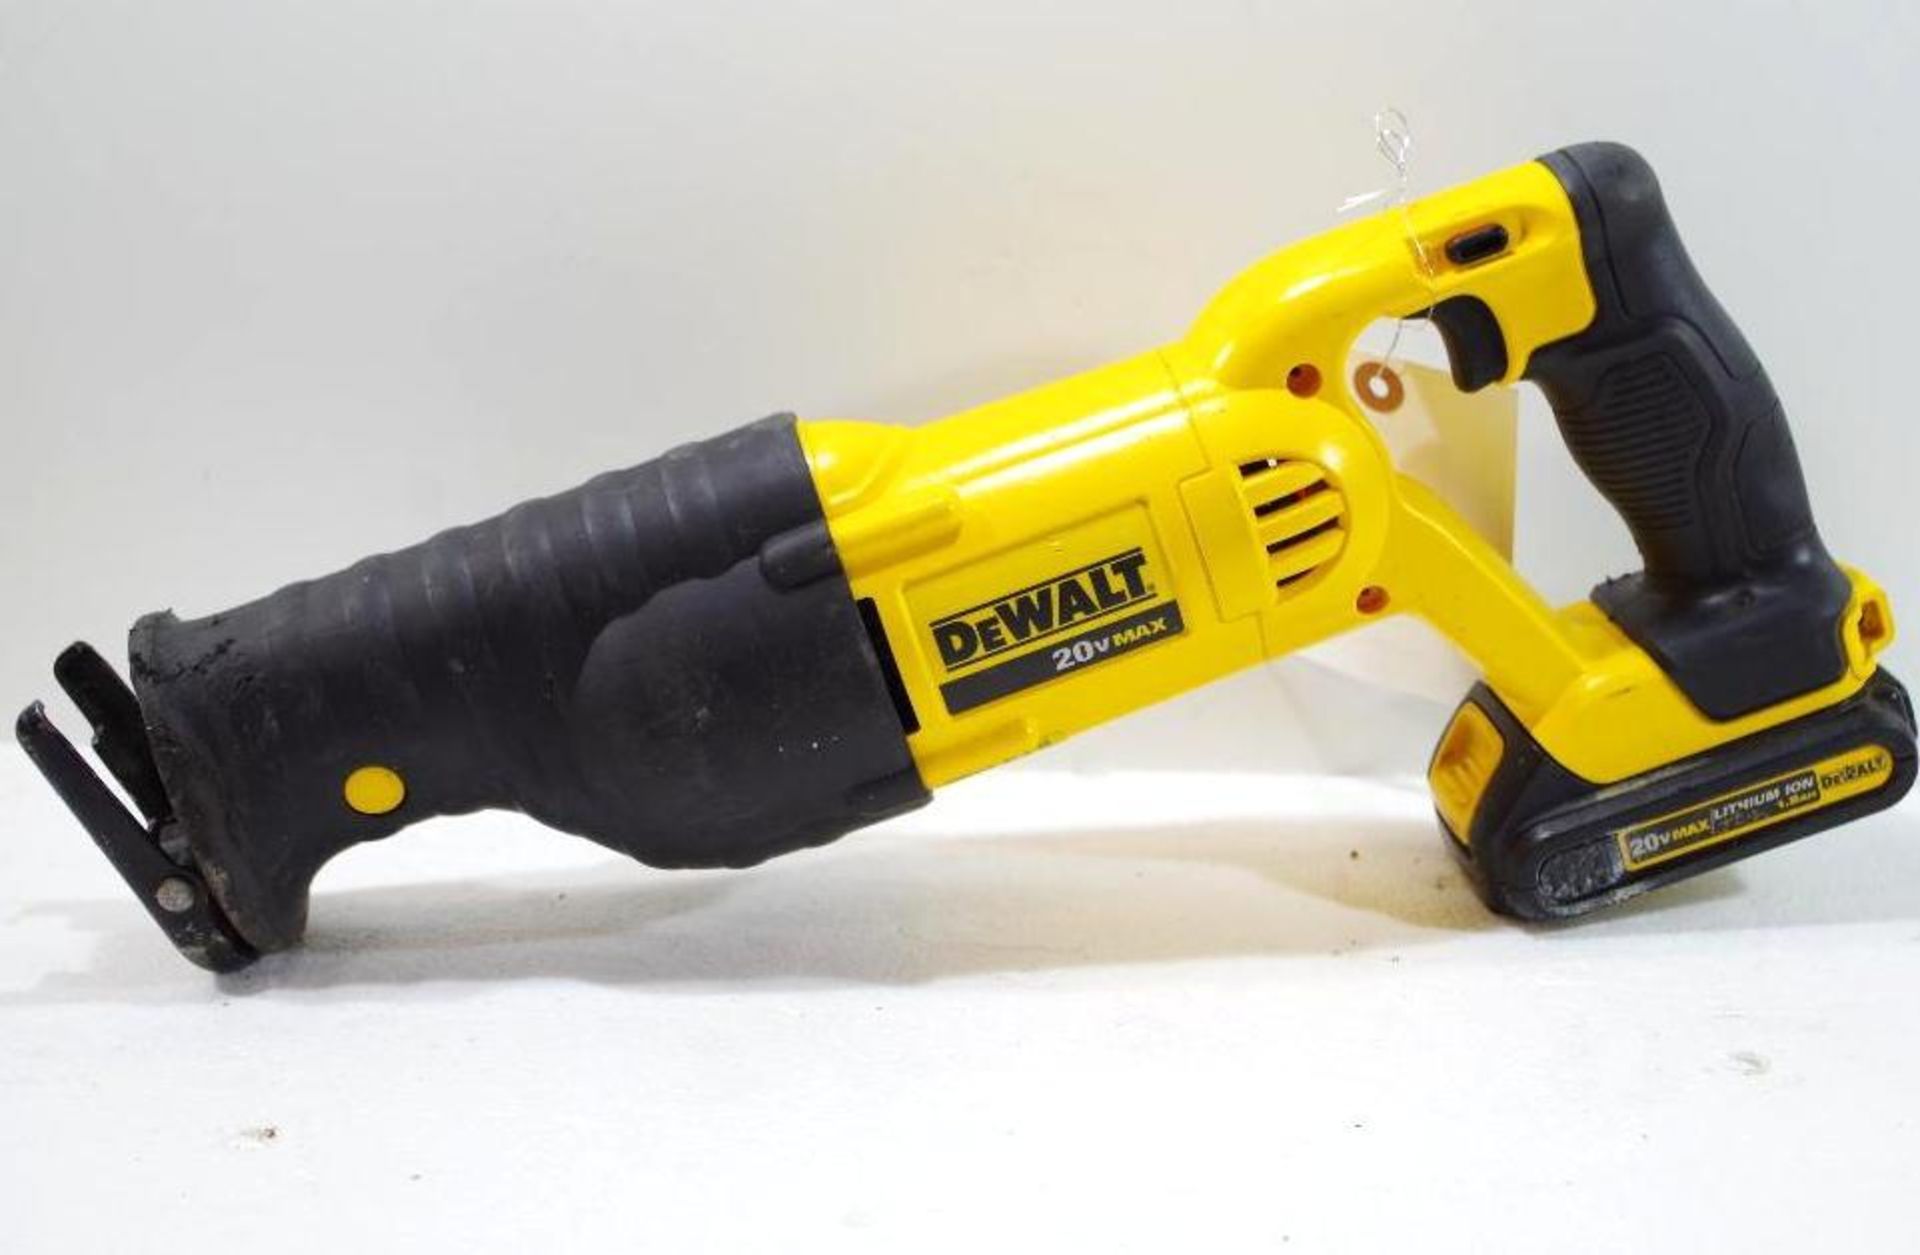 DEWALT 20V Variable Speed Reciprocating Saw M/N DCS380 w/ Battery - Image 2 of 3